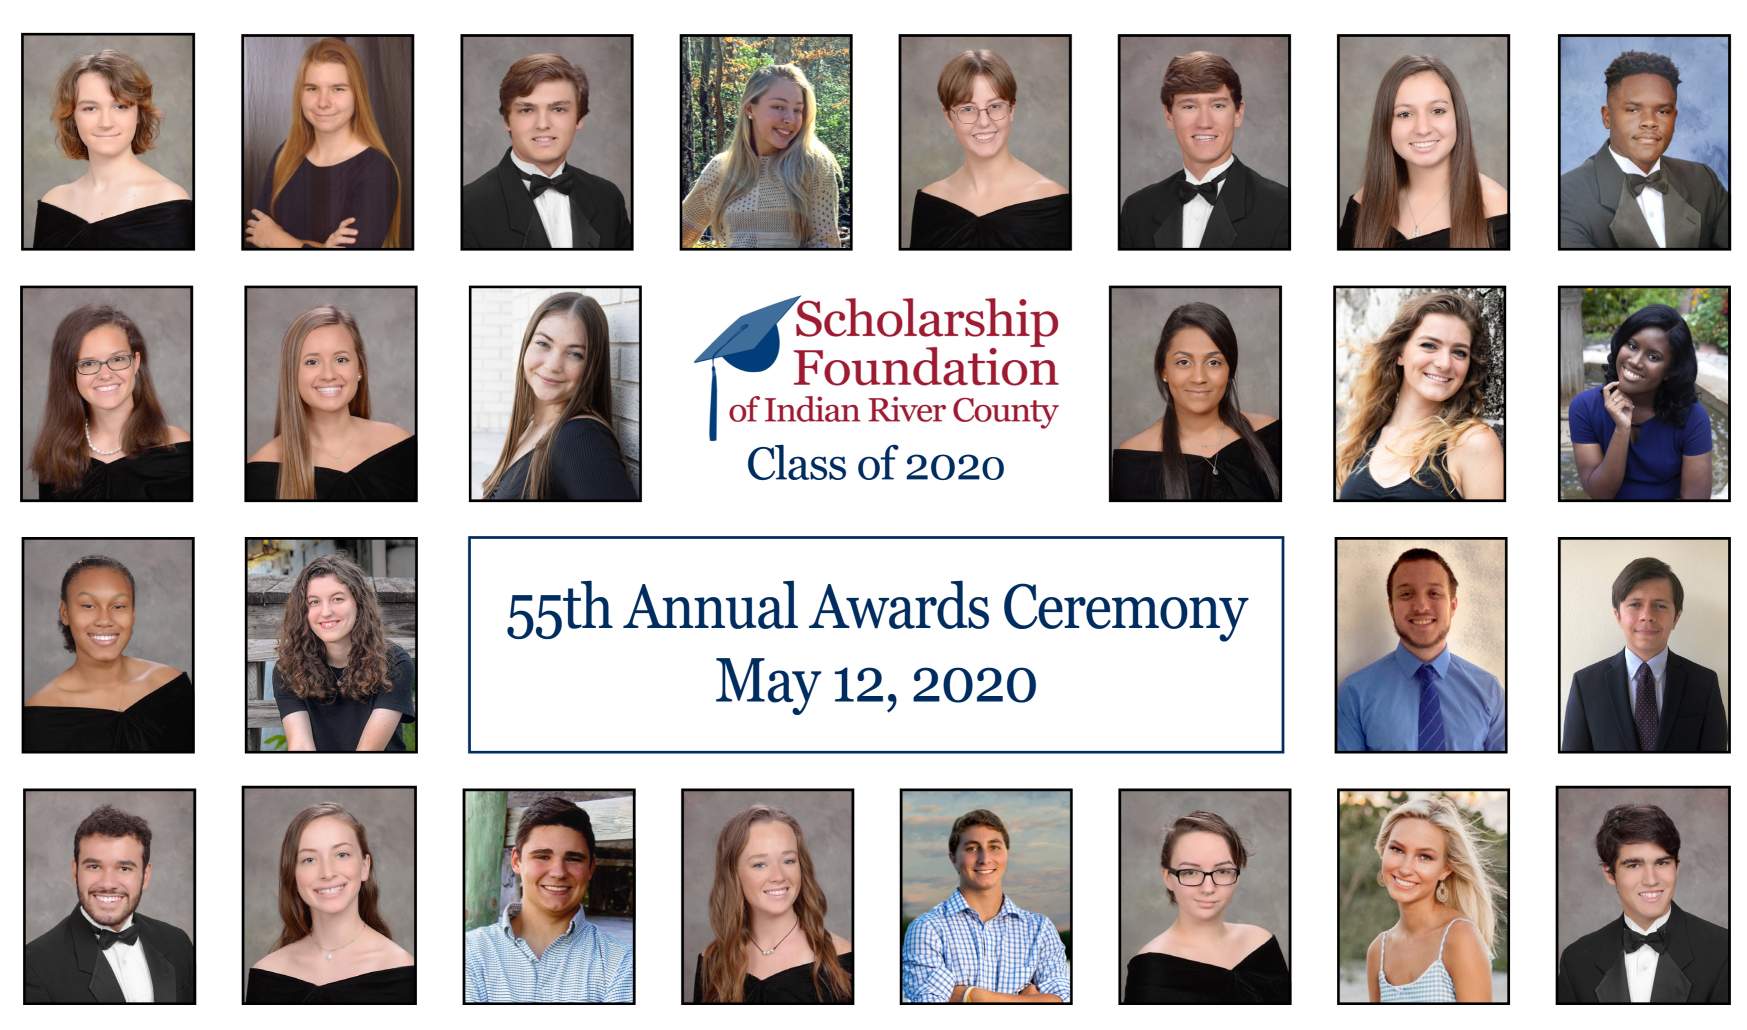 Class of 2020 received scholarship awards at 55th Awards Ceremony held "virtually" by Zoom webinar